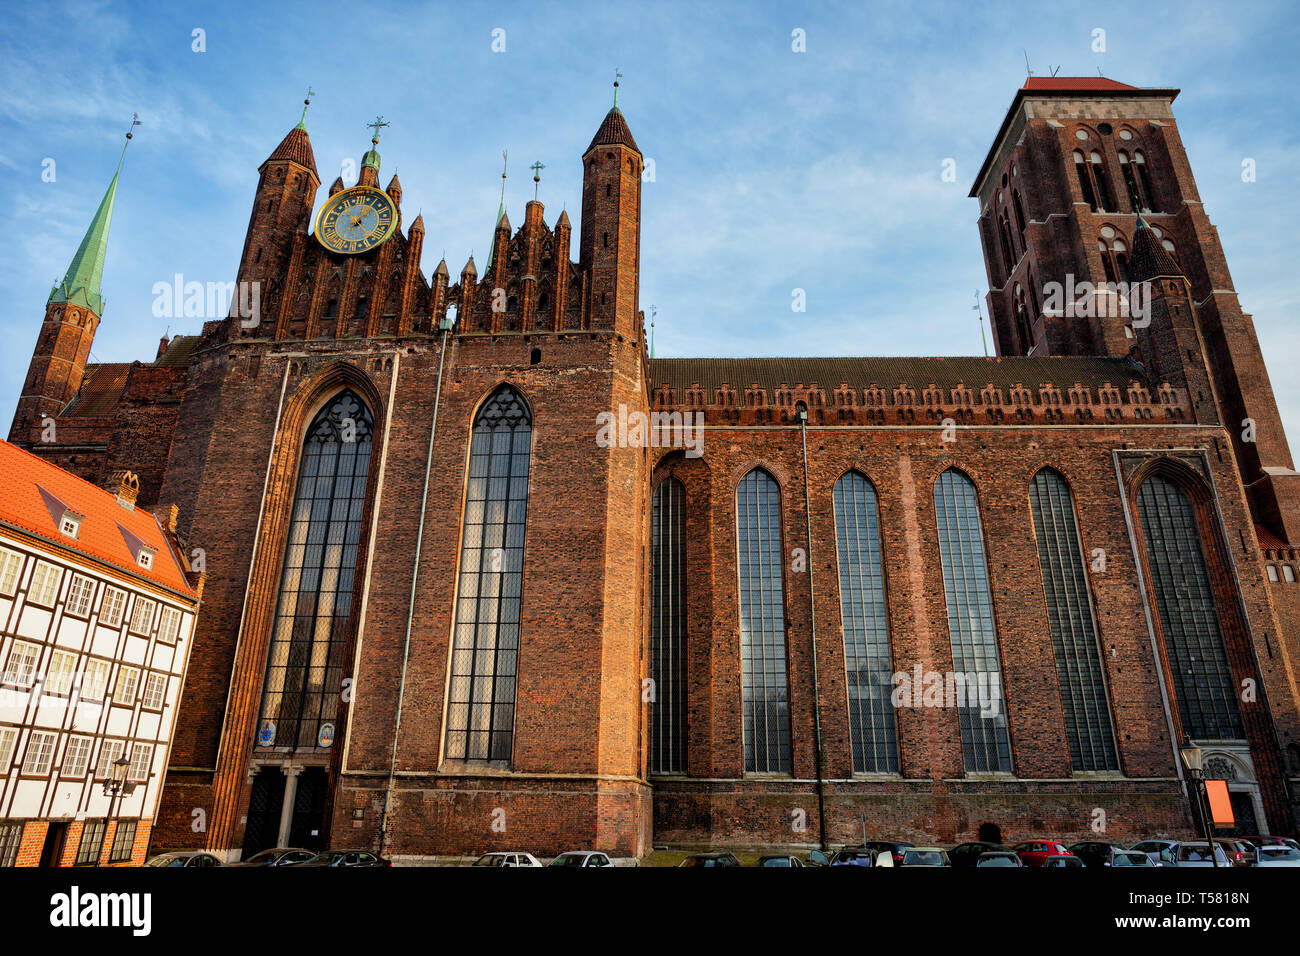 St. Mary Church (Bazylika Mariacka) in Gdansk, Poland, Basilica of the Assumption of the Blessed Virgin Mary, Gothic architecture city landmark built  Stock Photo